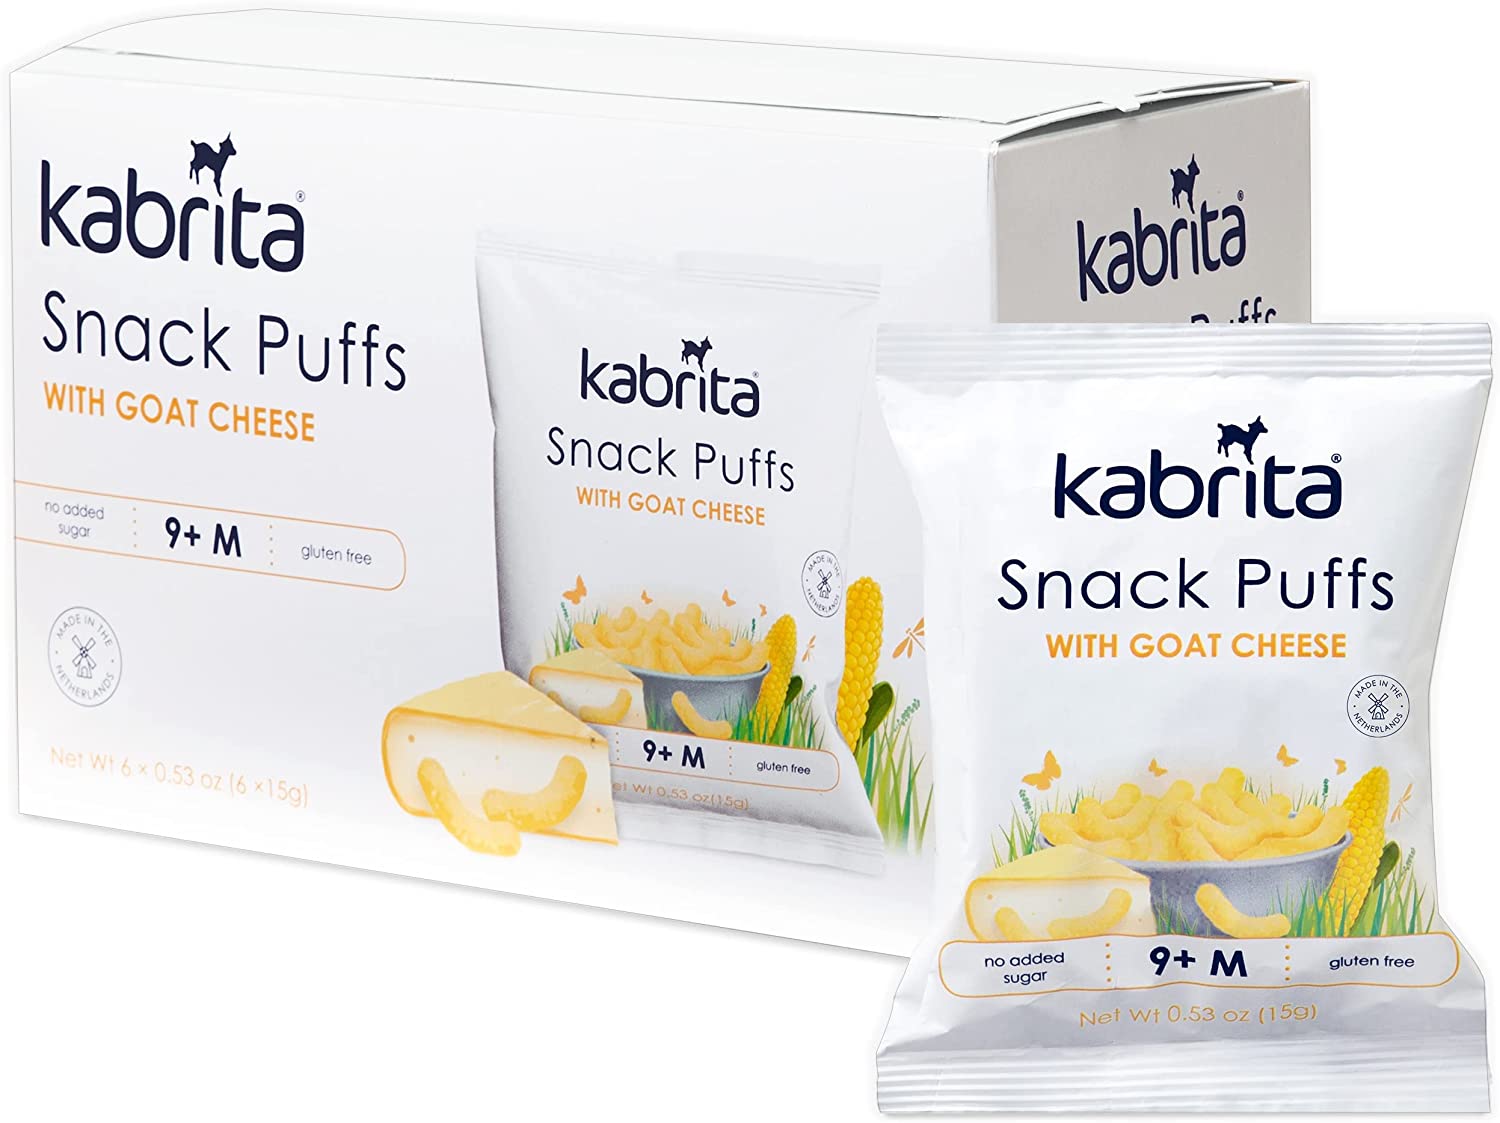 Kabrita Snack Puffs With Goat Cheese, 6 Packs